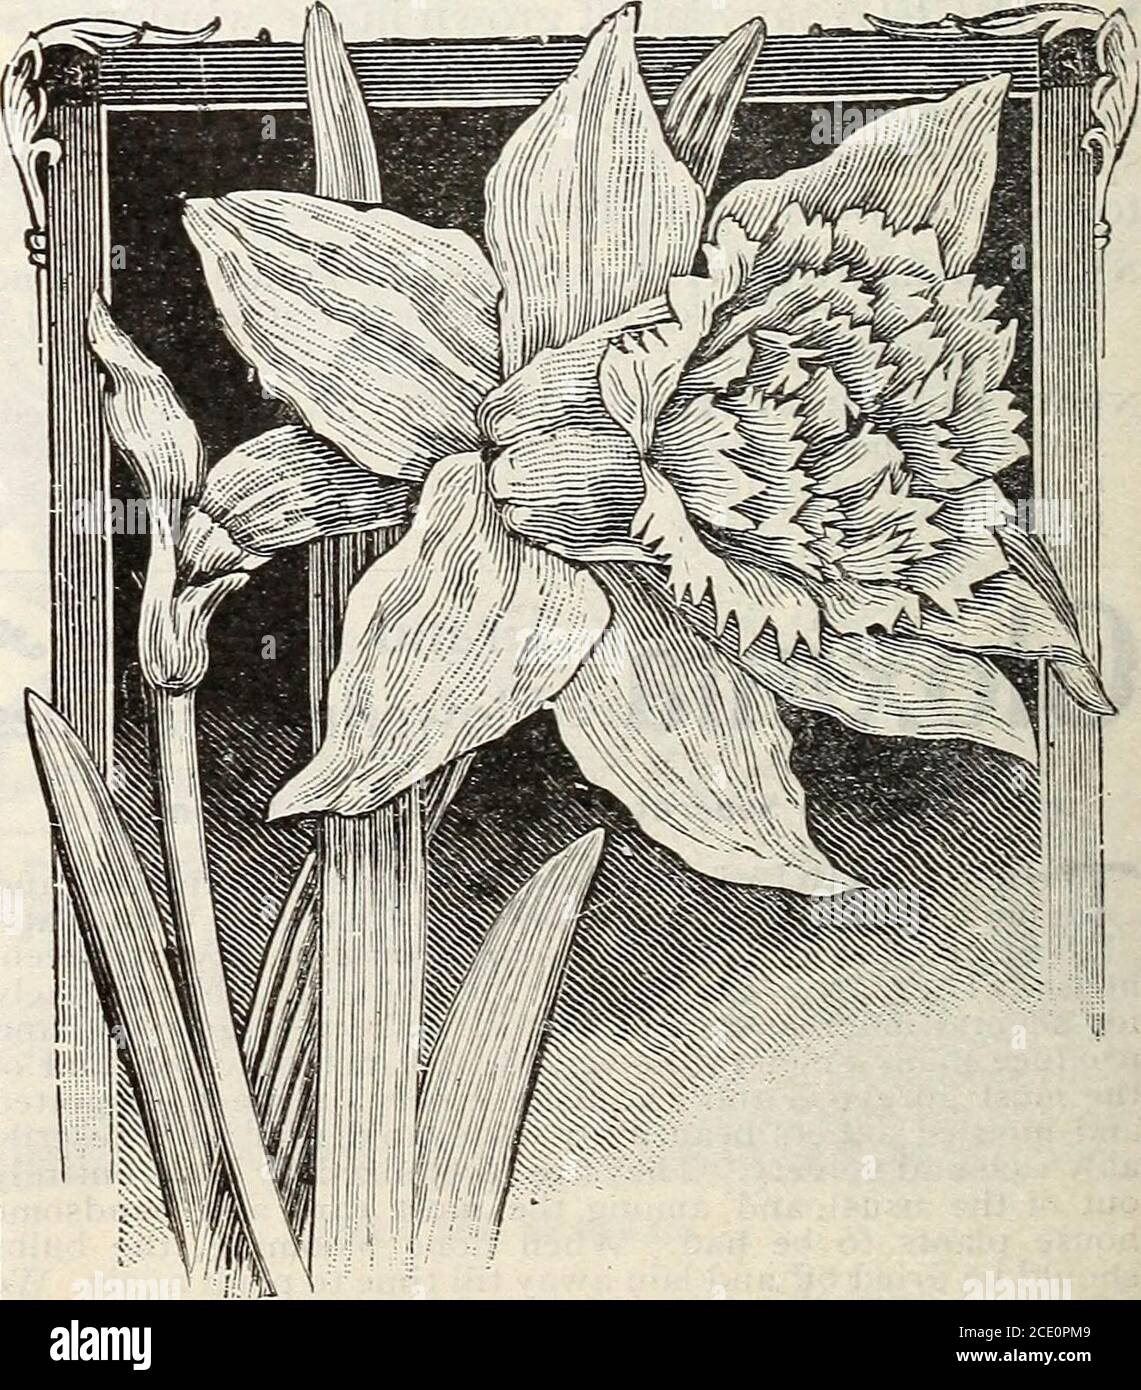 . New floral guide : autumn 1903 . cts. Double Narcissus or Improved Daffodils ALBA PLENA ODORATA- The Double White Poets Nar-cissus, or Gardenia-Flowered Daffodils. Double snow-whitegardenia-like flowers, delightfully sweet-scented. 3 cts. each.,25 cts. per doz., $1.50 per 100, postpaid. INCOSLPARABLE-Fl. PI. Large handsome flowers, as doubleas roses, bright canary yellow, with rich orange centre. 3 cts.each, 25 cts. per doz., $1.35 per 100, postpaid. SULPHUR OR SILVER PBXENIX-Creamy white with palesulphur centre. Considered the finest of the double sorts. 8 cts.each, 3 for 20 cts., 75 cts. p Stock Photo